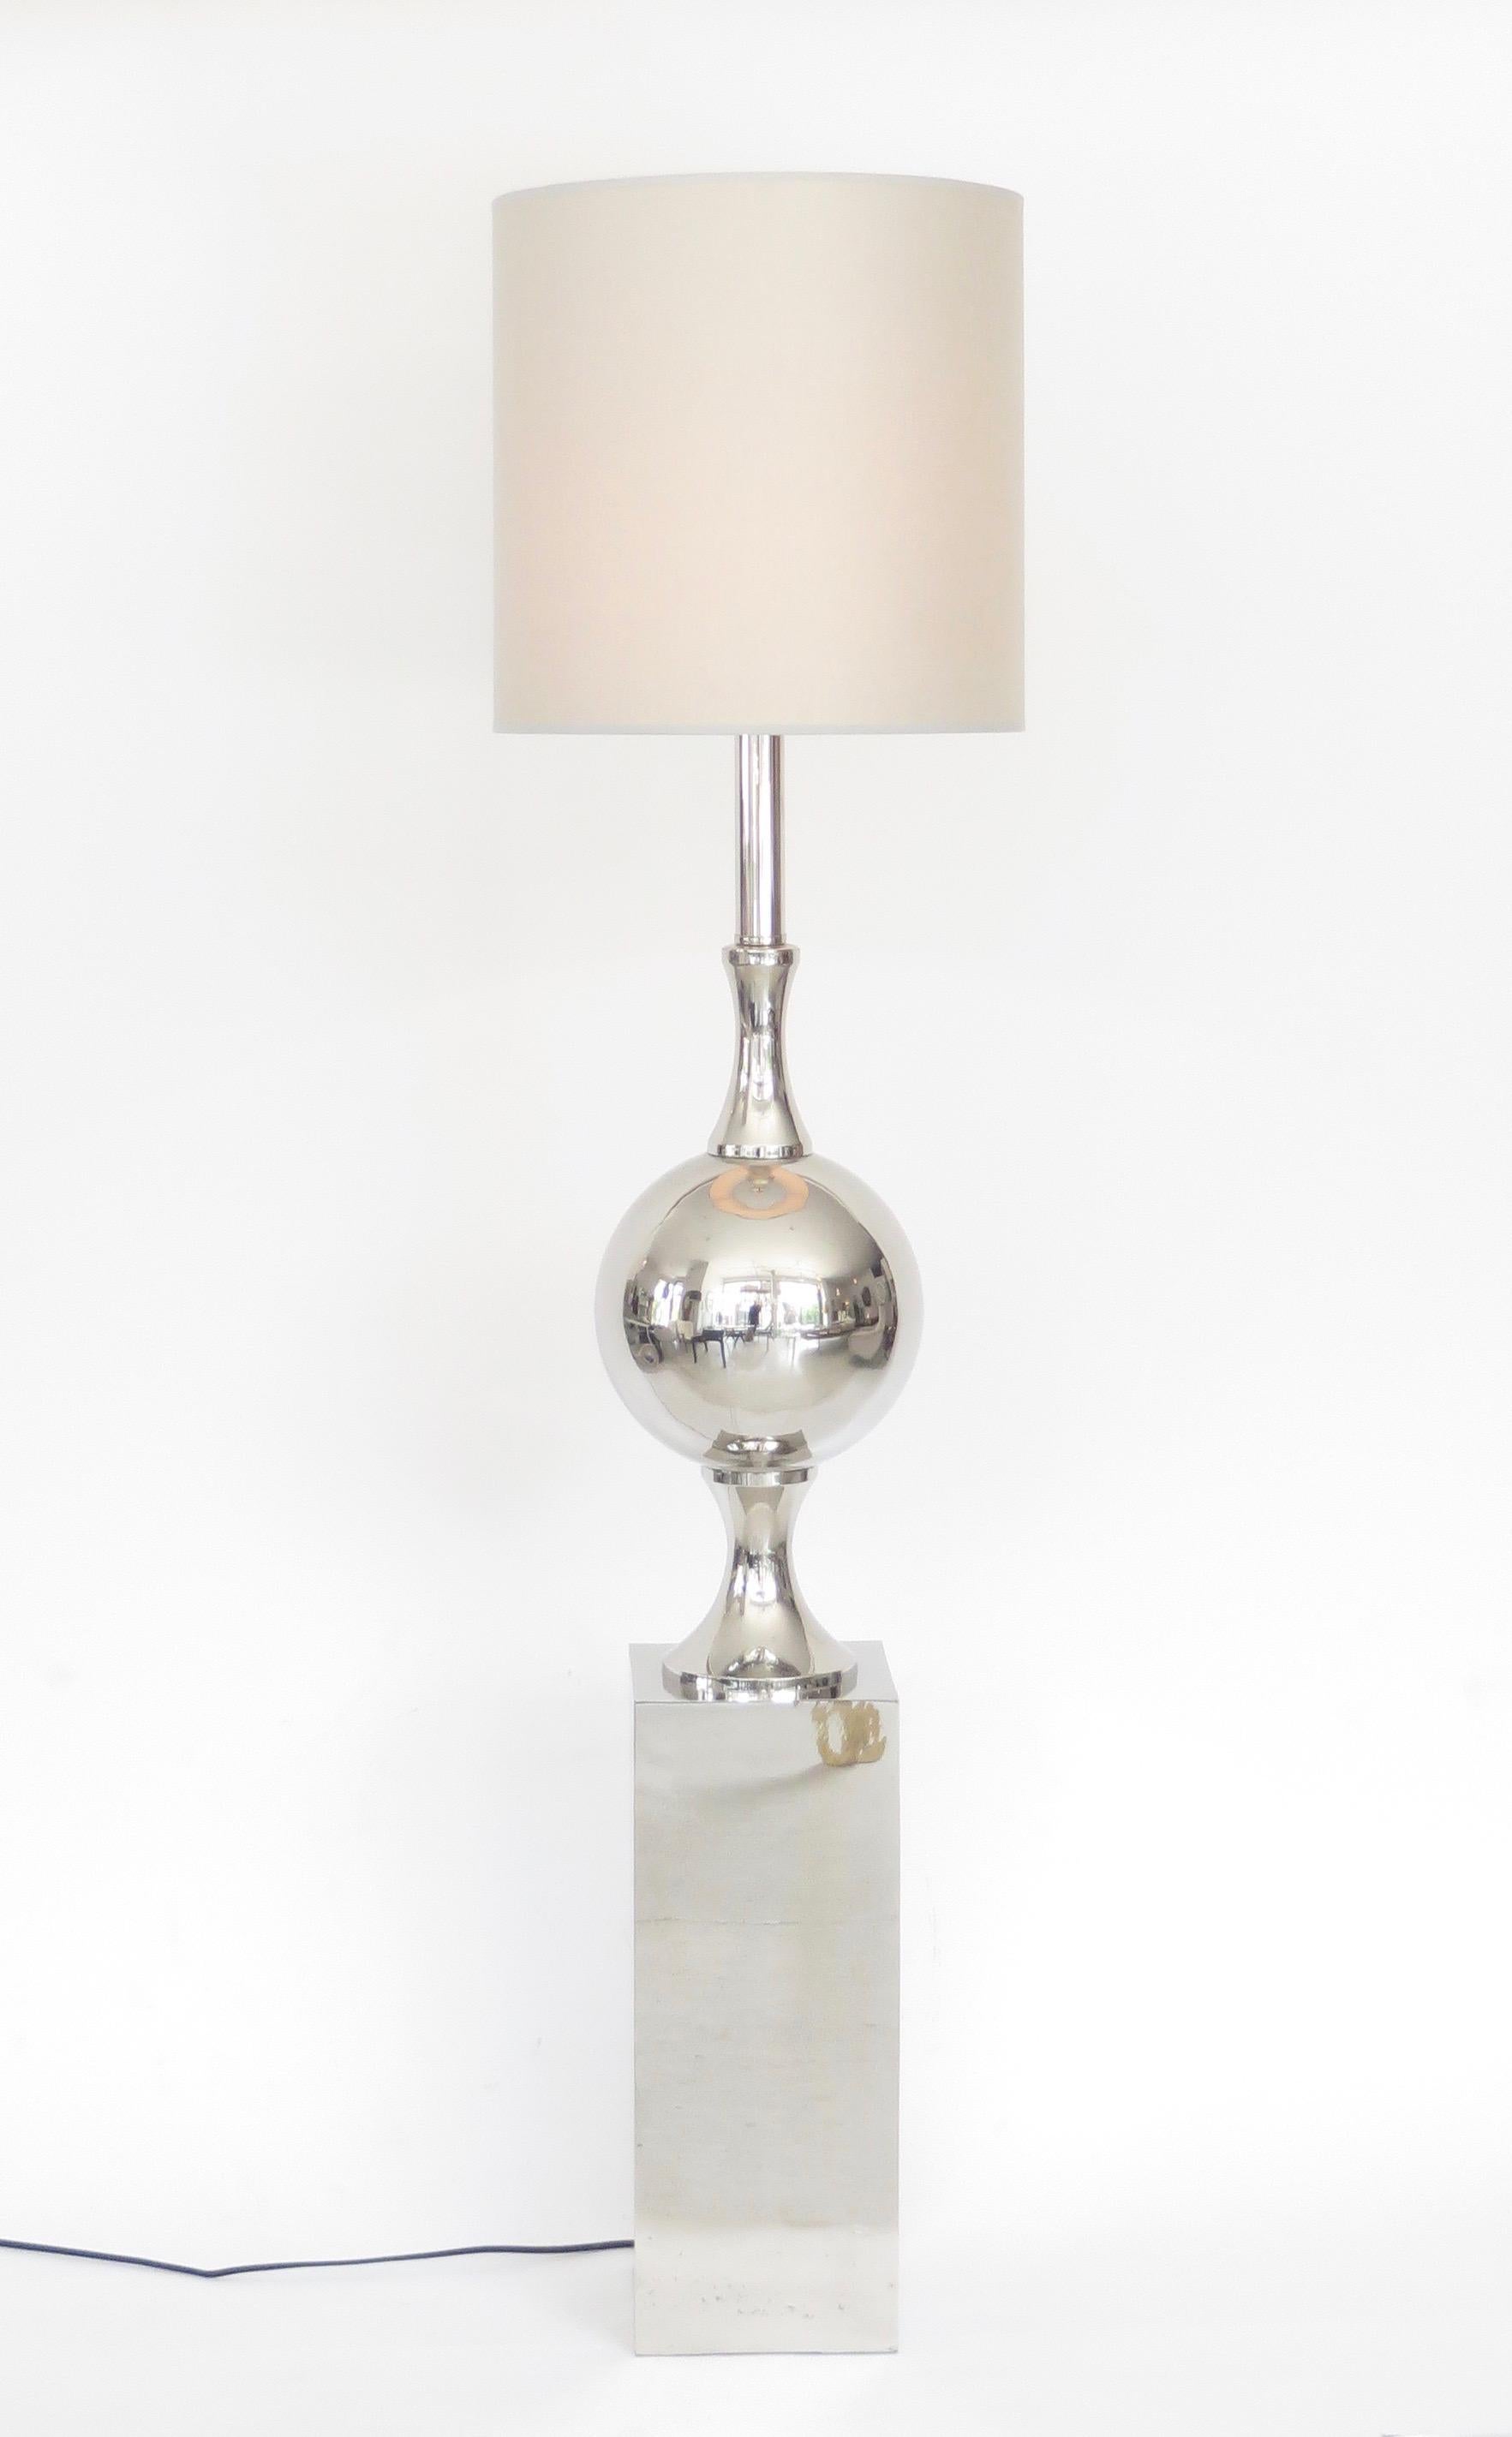 This floor lamp was designed by Maison Barbier and manufactured in Paris (France), circa 1970.
Polished nickel chromed steel structure. One piece, it does not disassemble into parts as it might appear.
This lamp has been rewired with one socket to